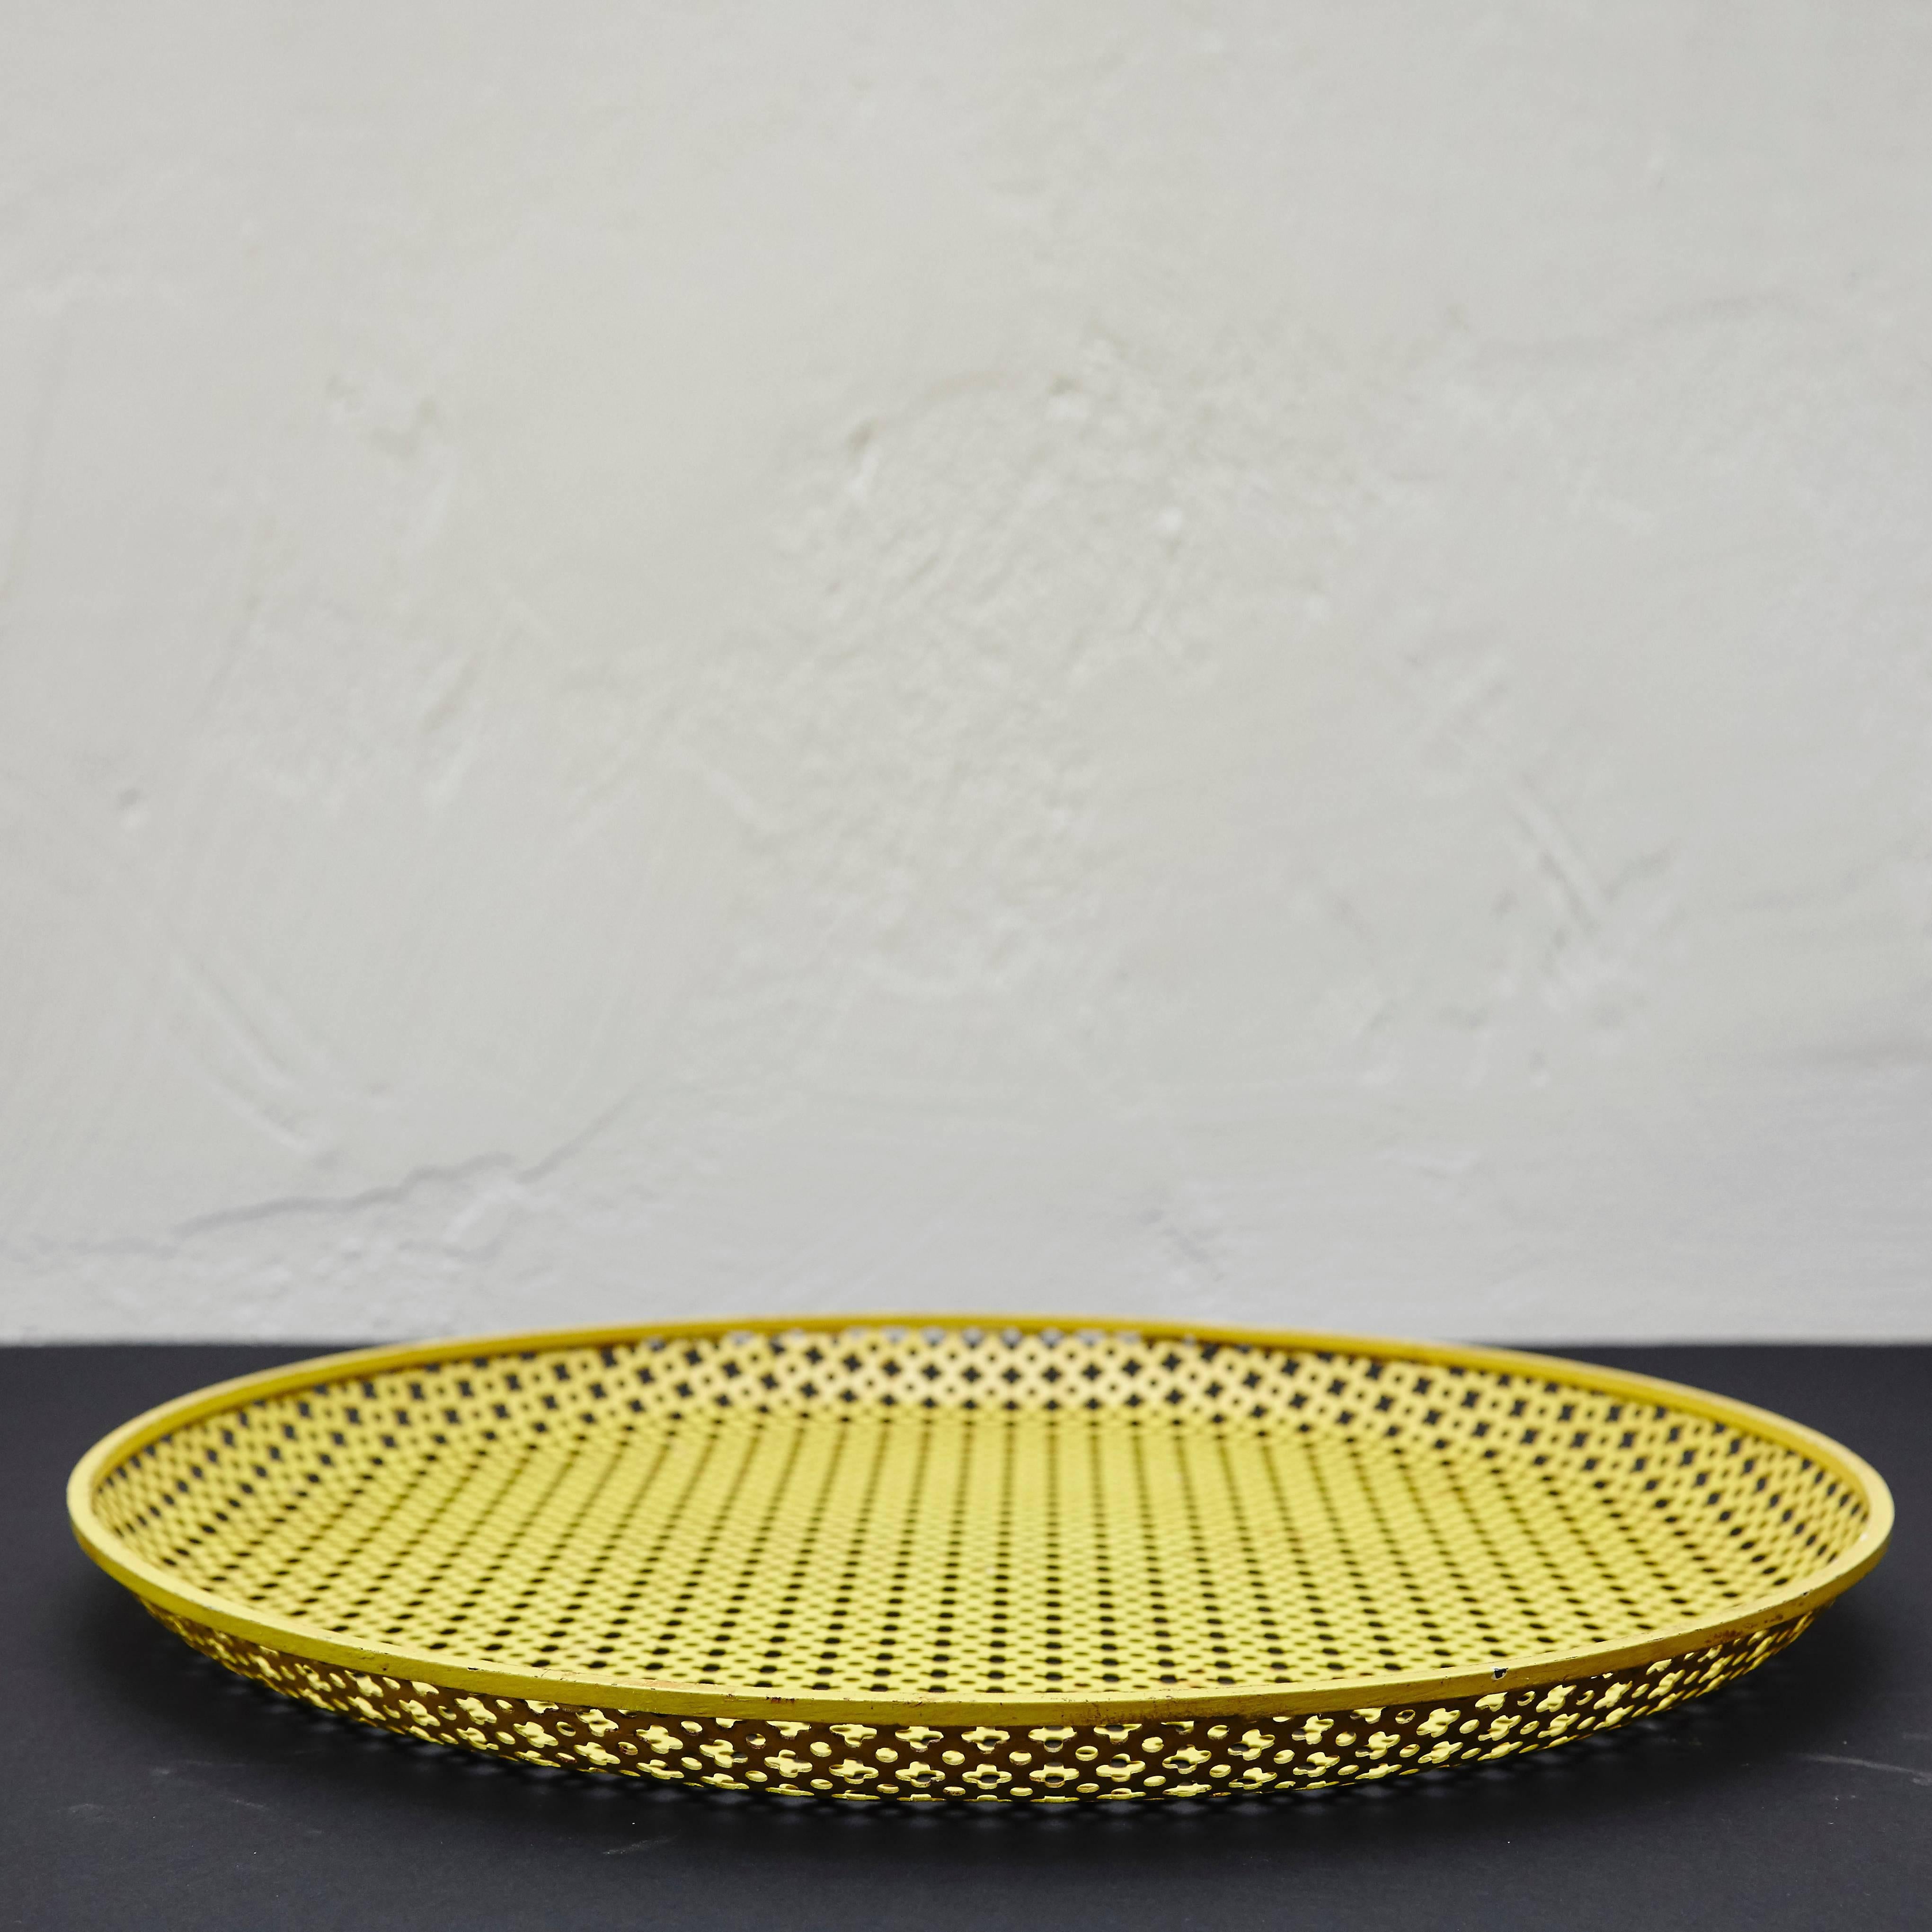 Enameled metal Plate designed by Mathieu Matégot.
Manufactured by Ateliers Matégot (France), circa 1950.
Lacquered perforated metal with original paint.

In original condition, with minor wear consistent with age and use, preserving a beautiful